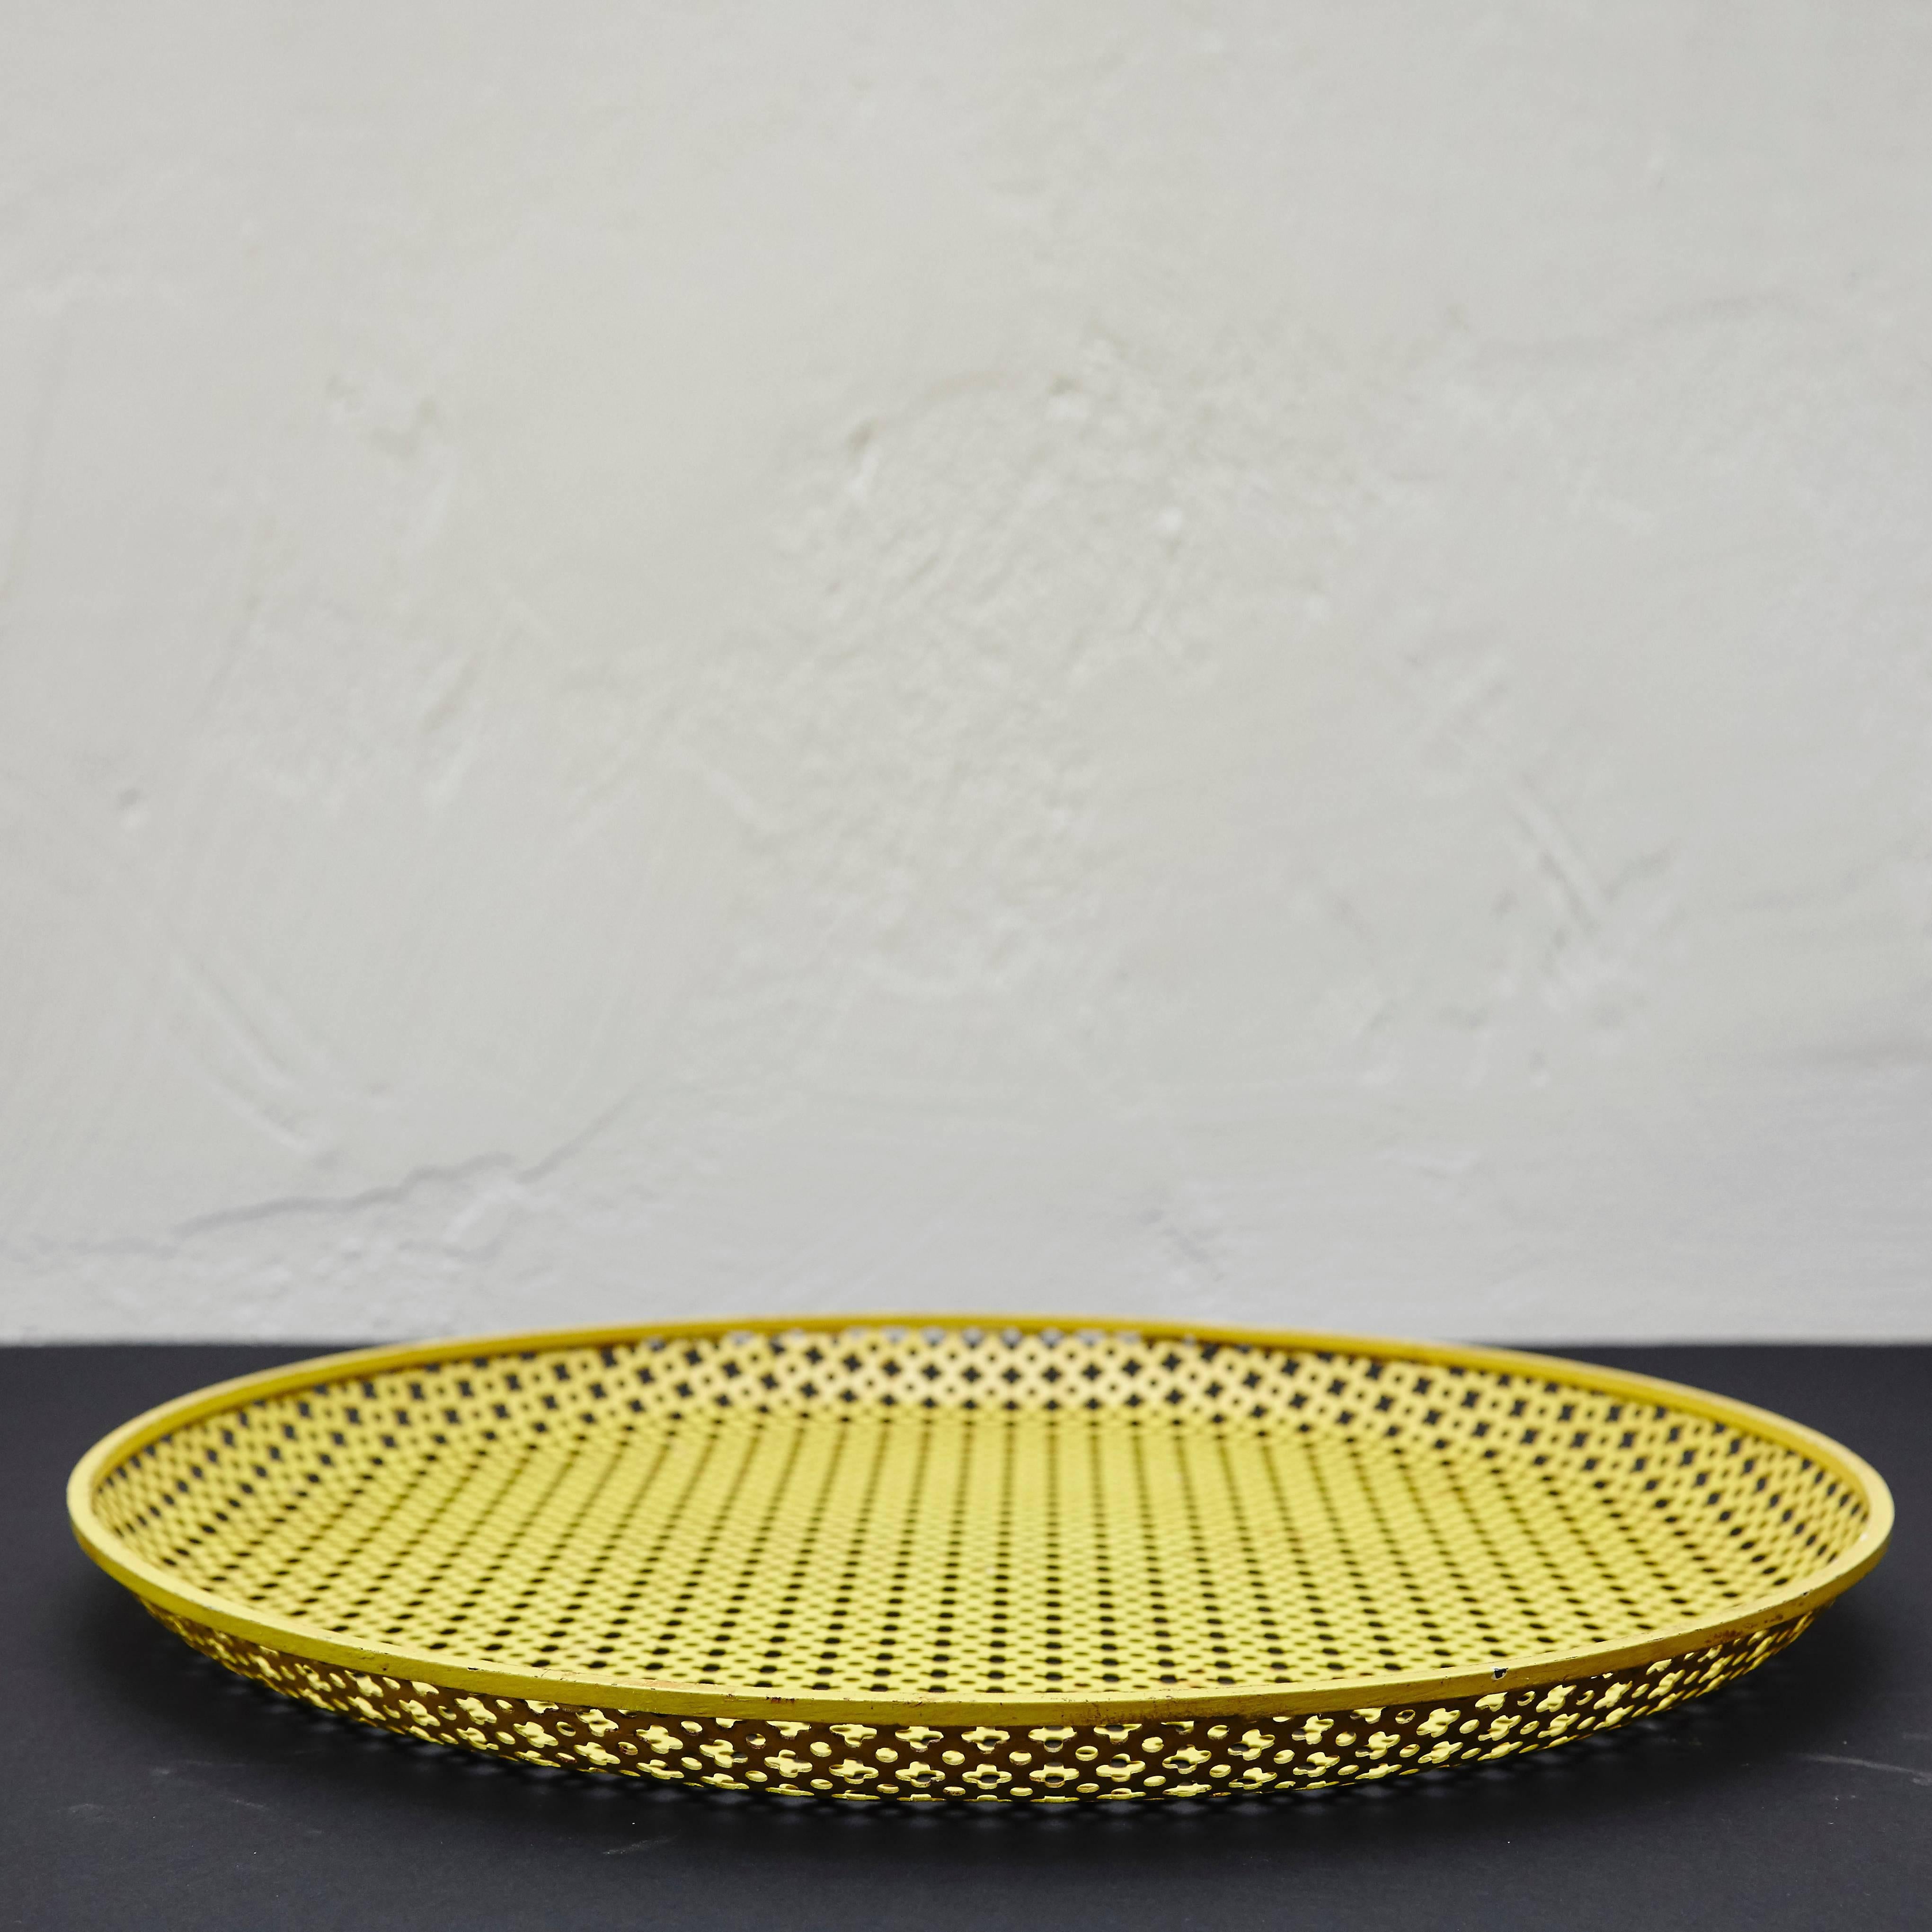 Enameled metal Plate designed by Mathieu Matégot.
Manufactured by Ateliers Matégot (France), circa 1950.
Lacquered perforated metal with original paint.

In original condition, with minor wear consistent with age and use, preserving a beautiful